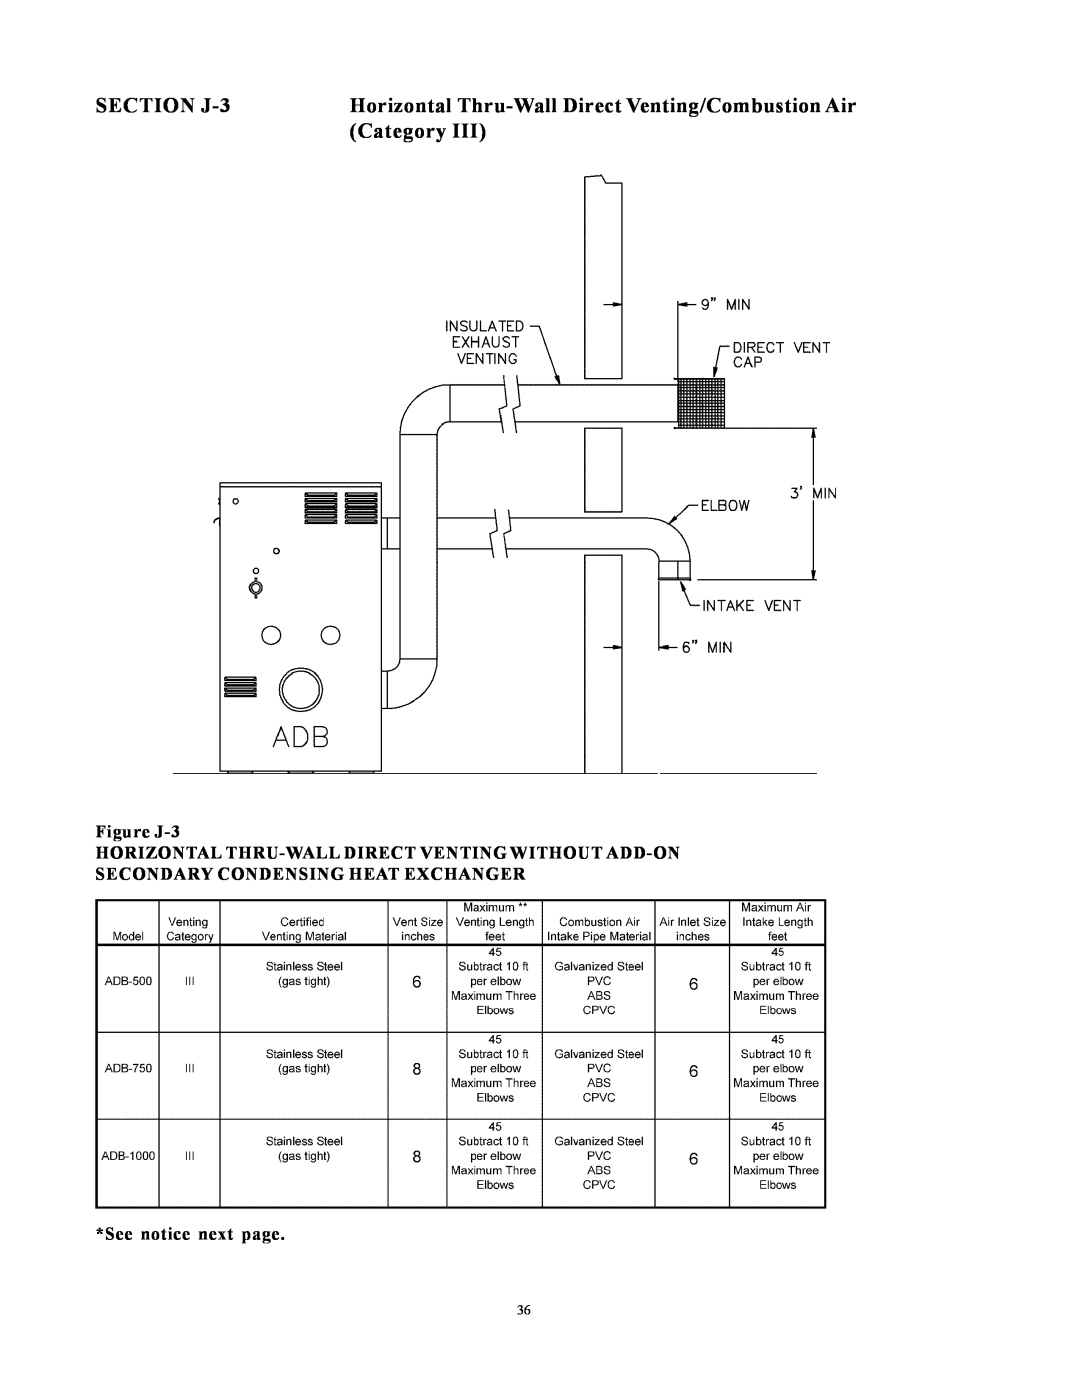 Raypak 500, 750 SECTION J-3, Horizontal Thru-WallDirect Venting/Combustion Air, Category, Figure J-3, See notice next page 